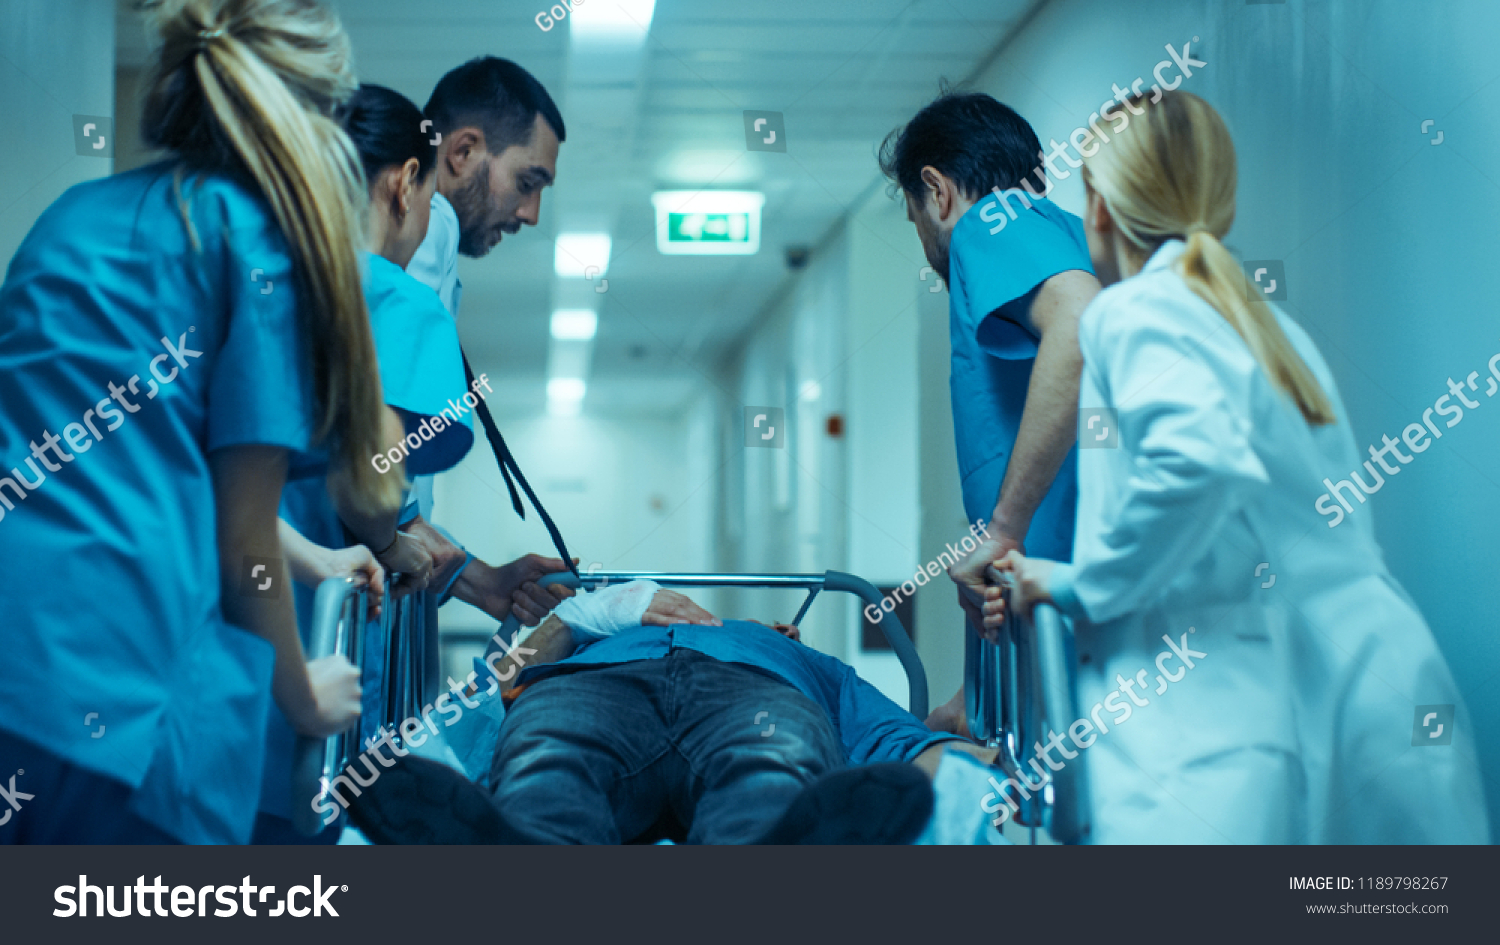 Emergency Department: Doctors, Nurses and Surgeons Move Seriously Injured Patient Lying on a Stretcher Through Hospital Corridors. Medical Staff in a Hurry Move Patient into Operating Theater. #1189798267